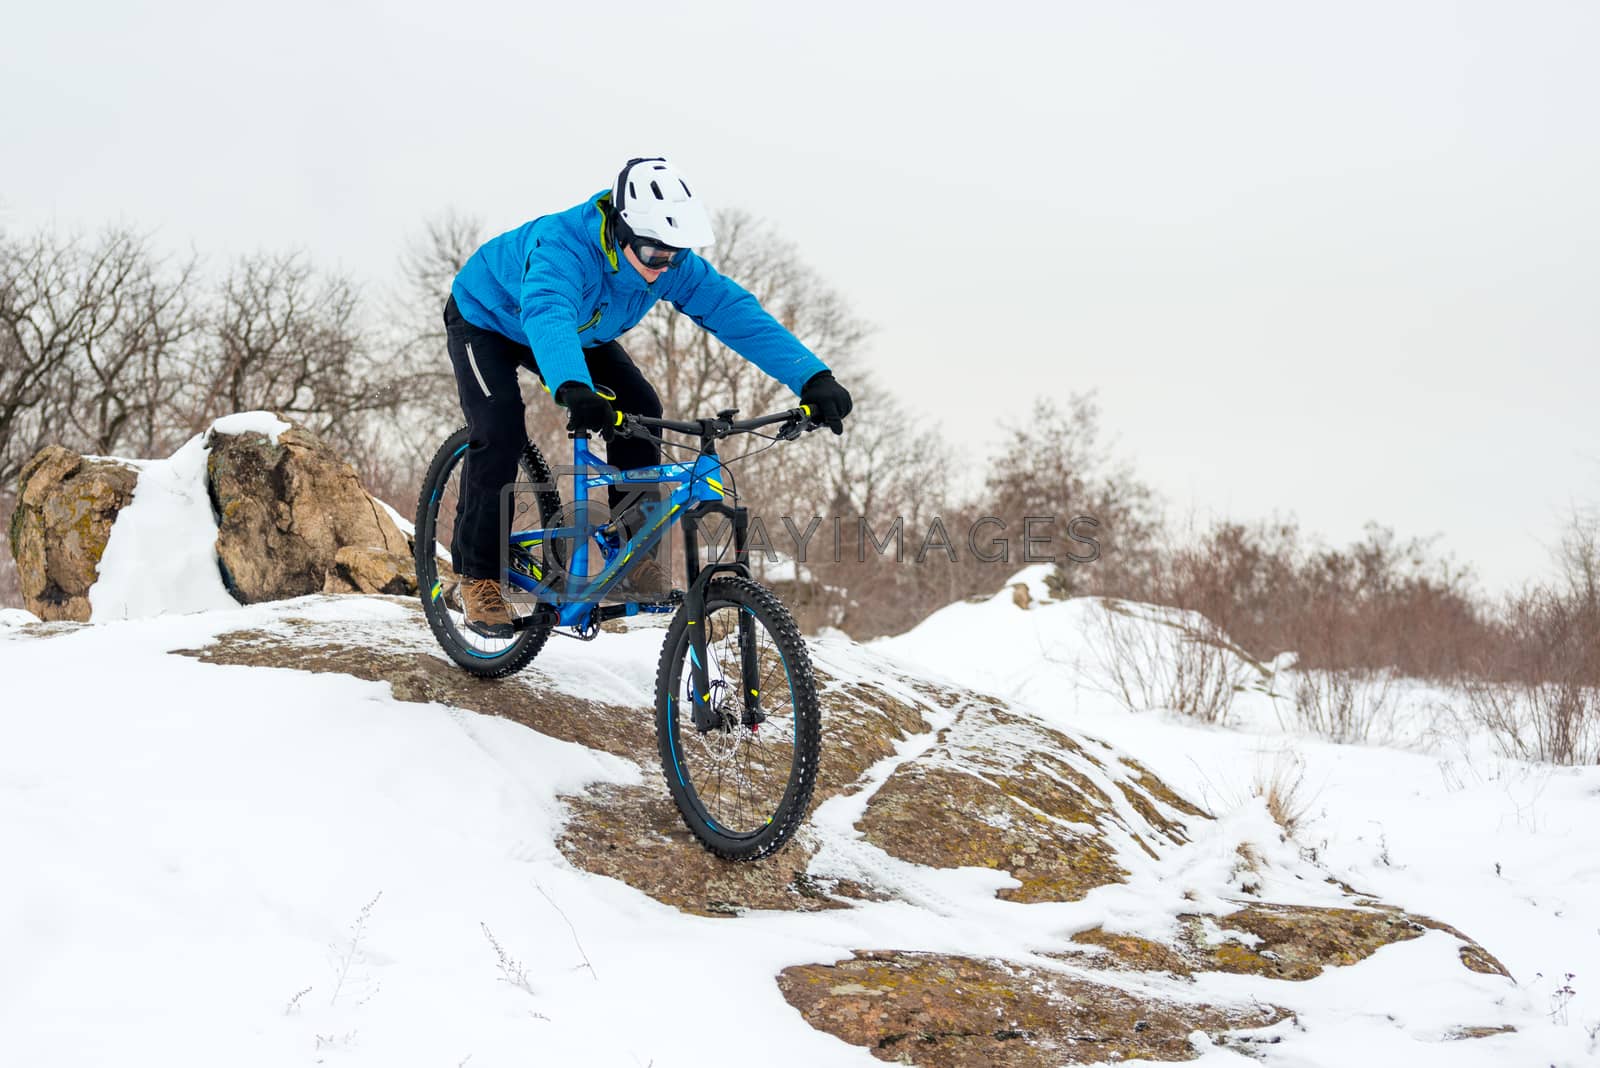 Royalty free image of Cyclist in Blue Riding Mountain Bike on Rocky Winter Hill Covered with Snow. Extreme Sport and Enduro Biking Concept. by maxpro